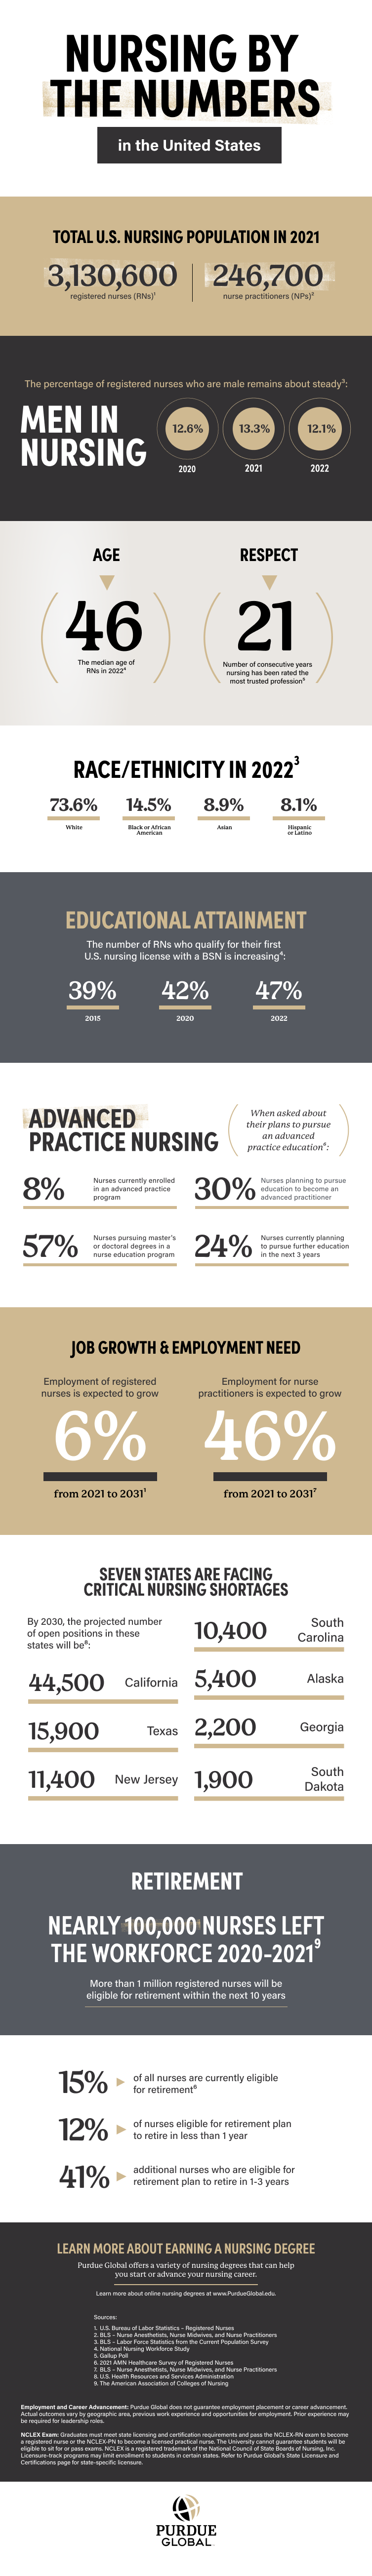 Nursing by the Numbers [Infographic]